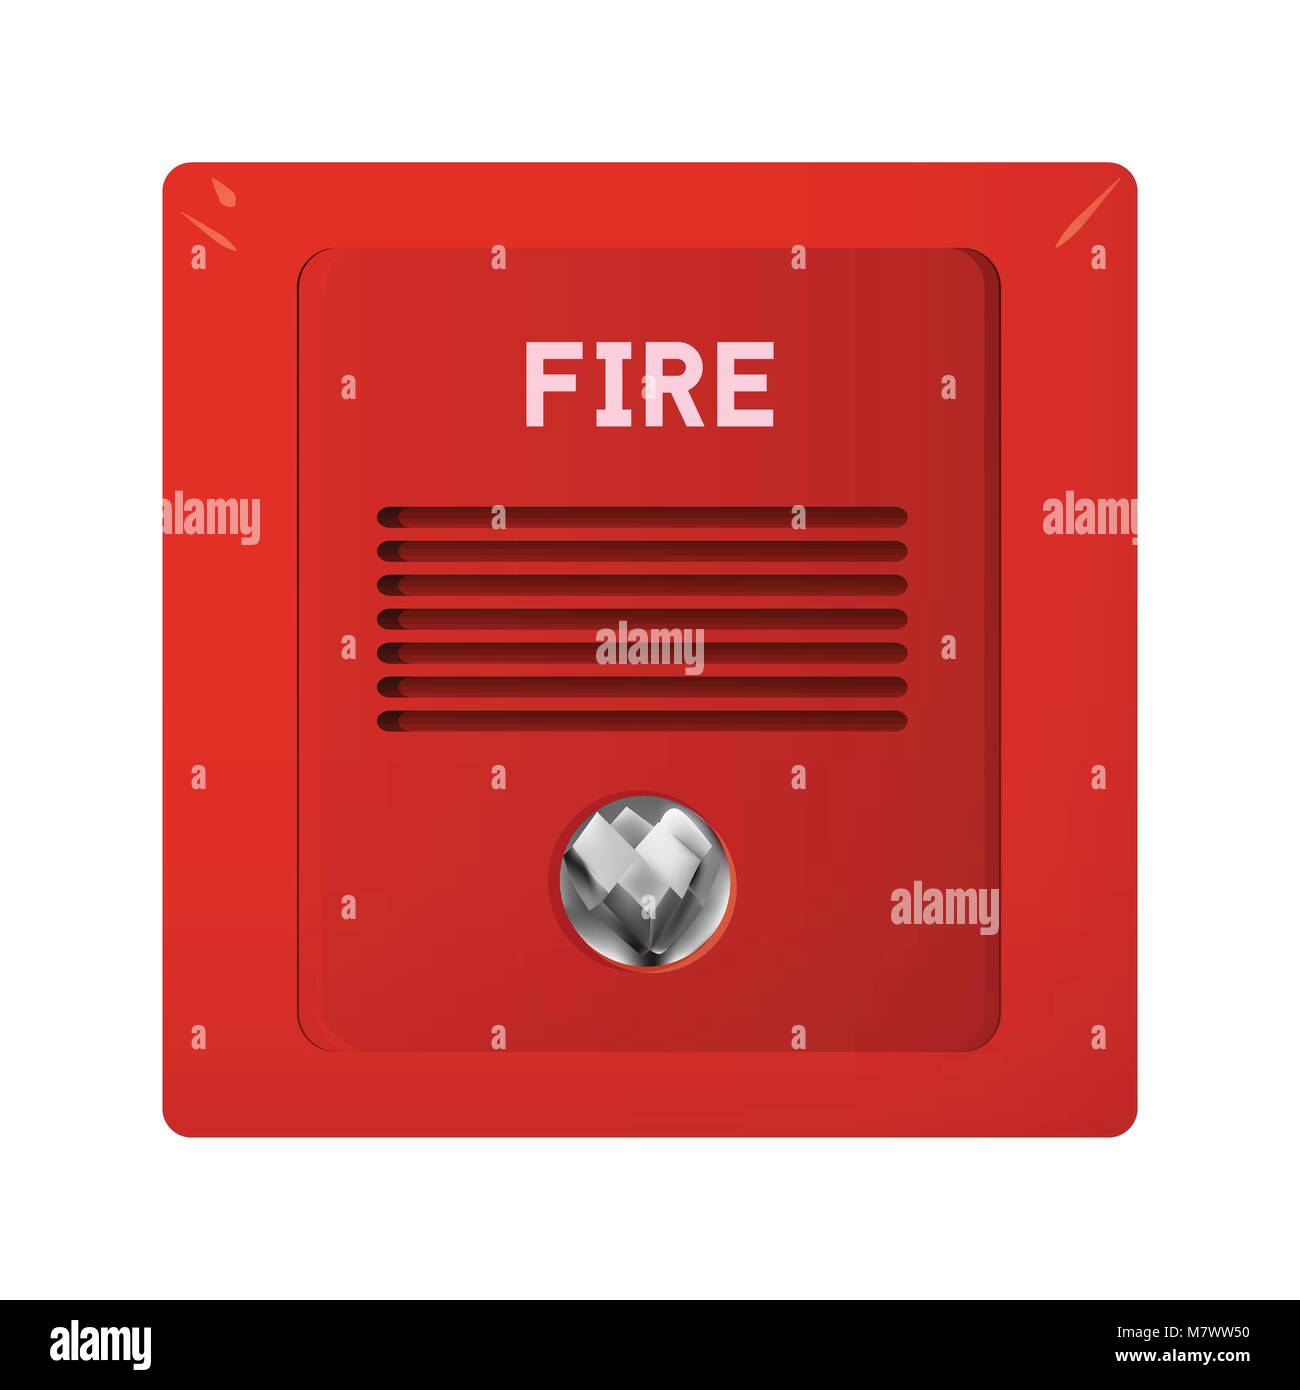 Fire alarm with light and audible alarm. Security system in office vector illustration. Stock Vector